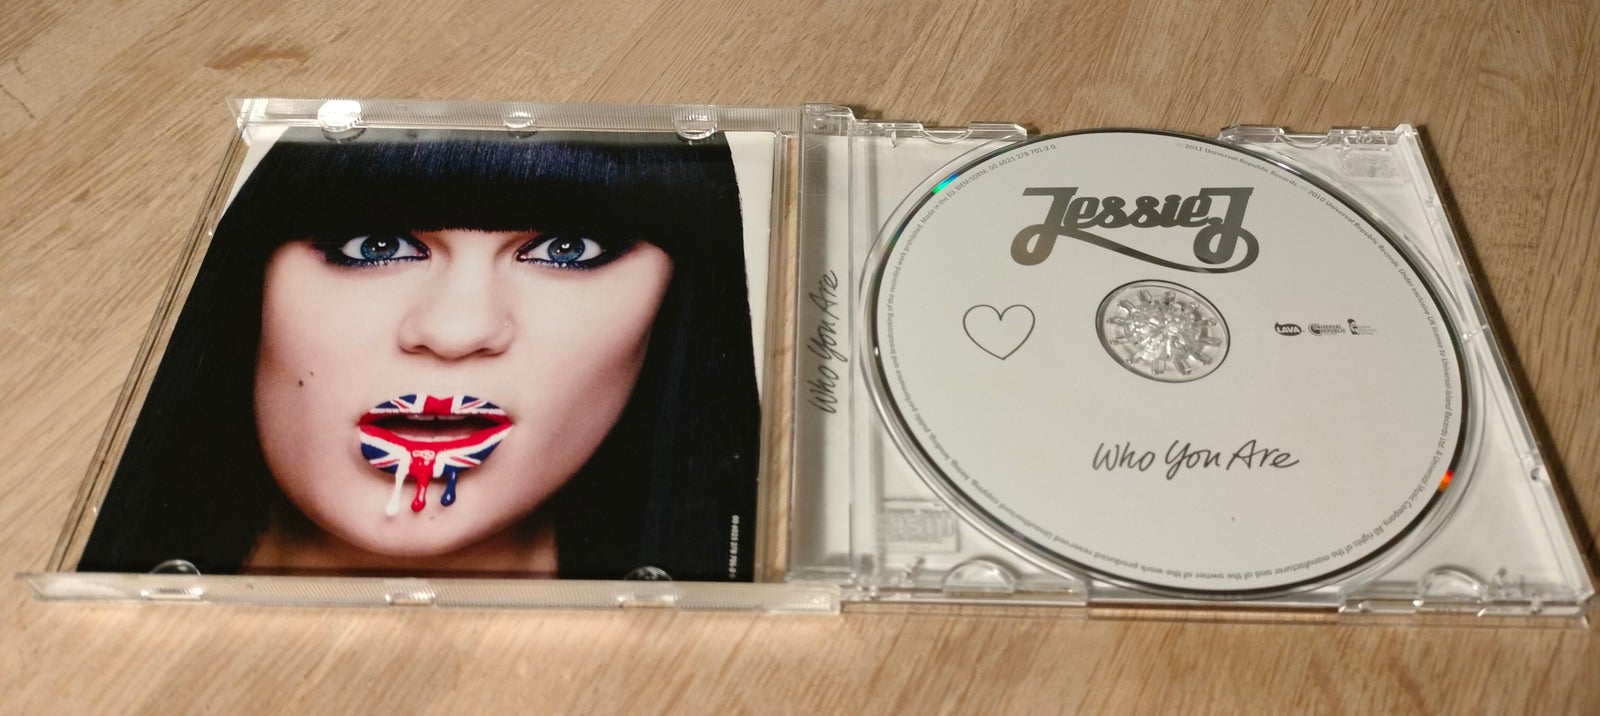 Jessie J: Who You Are (Platinum Edition), electronic